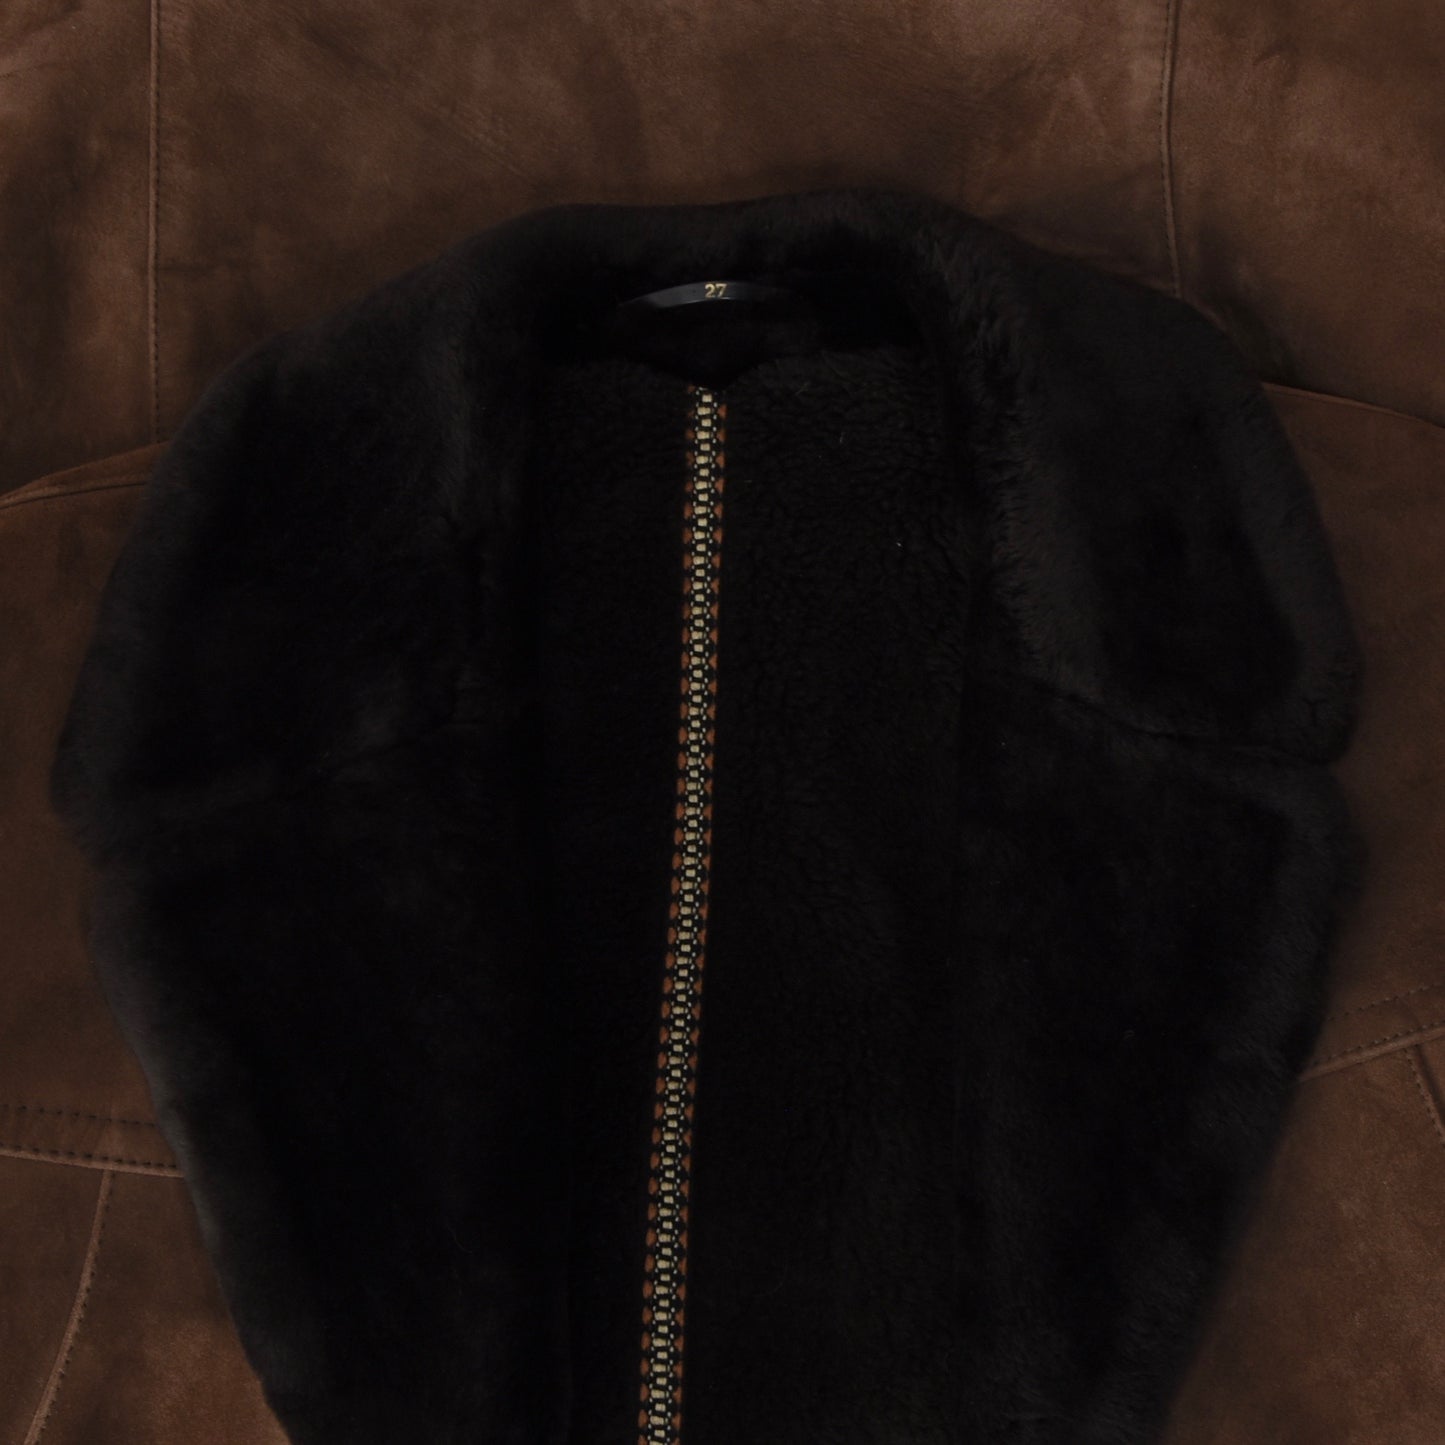 Genuine Leather Coat Feat. Shearling Collar Size 27 - Brown